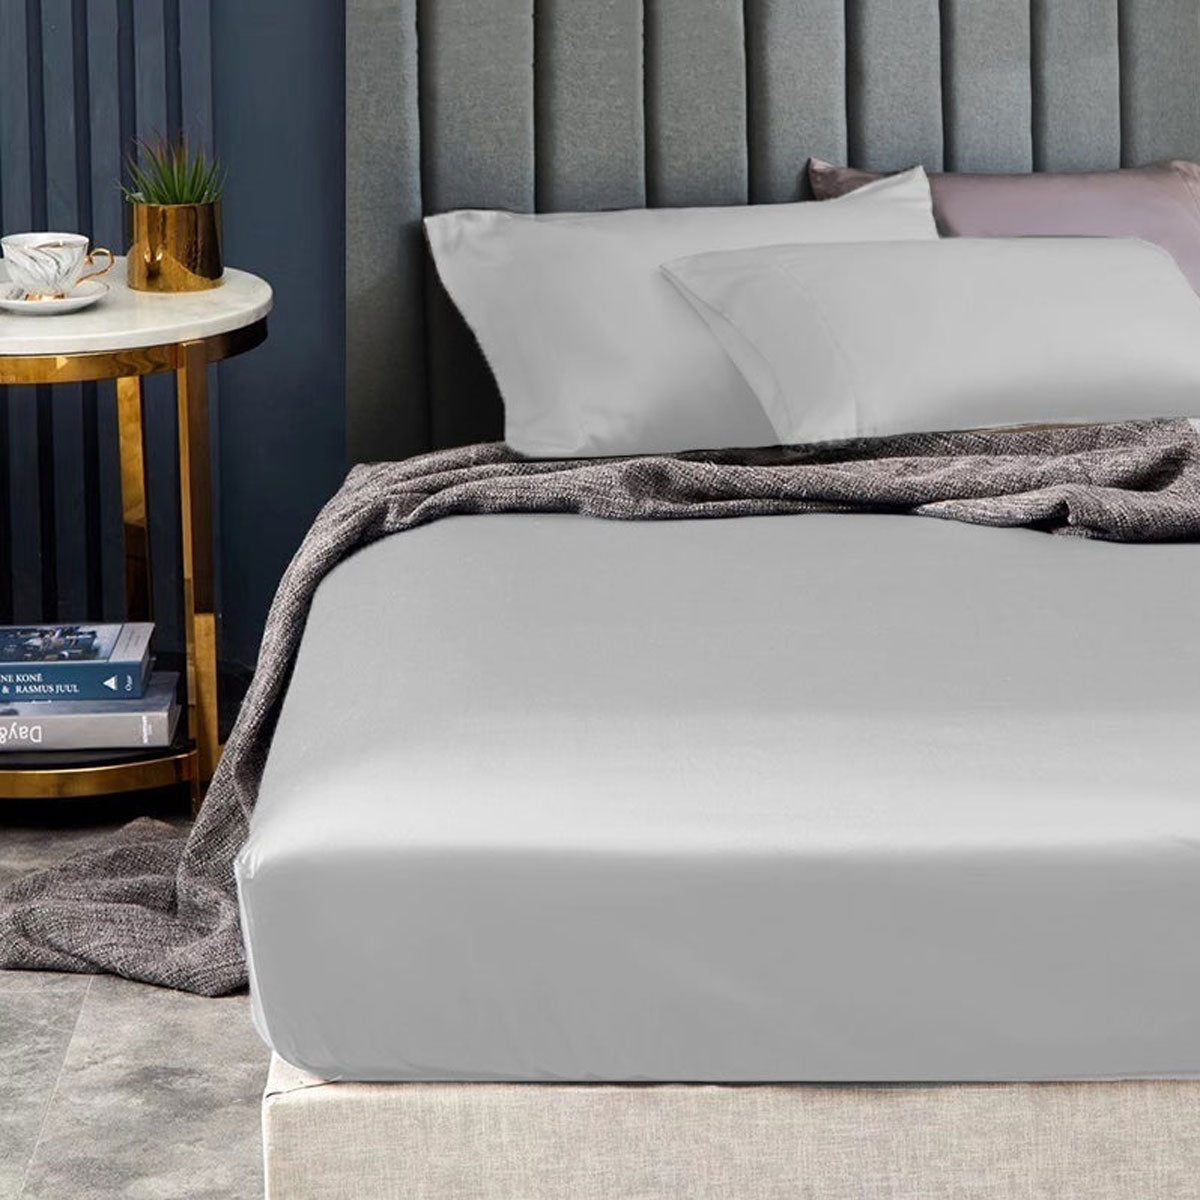 1500TC Elite Egyptian Cotton Sateen Fitted Sheet Combo Set Silver Single